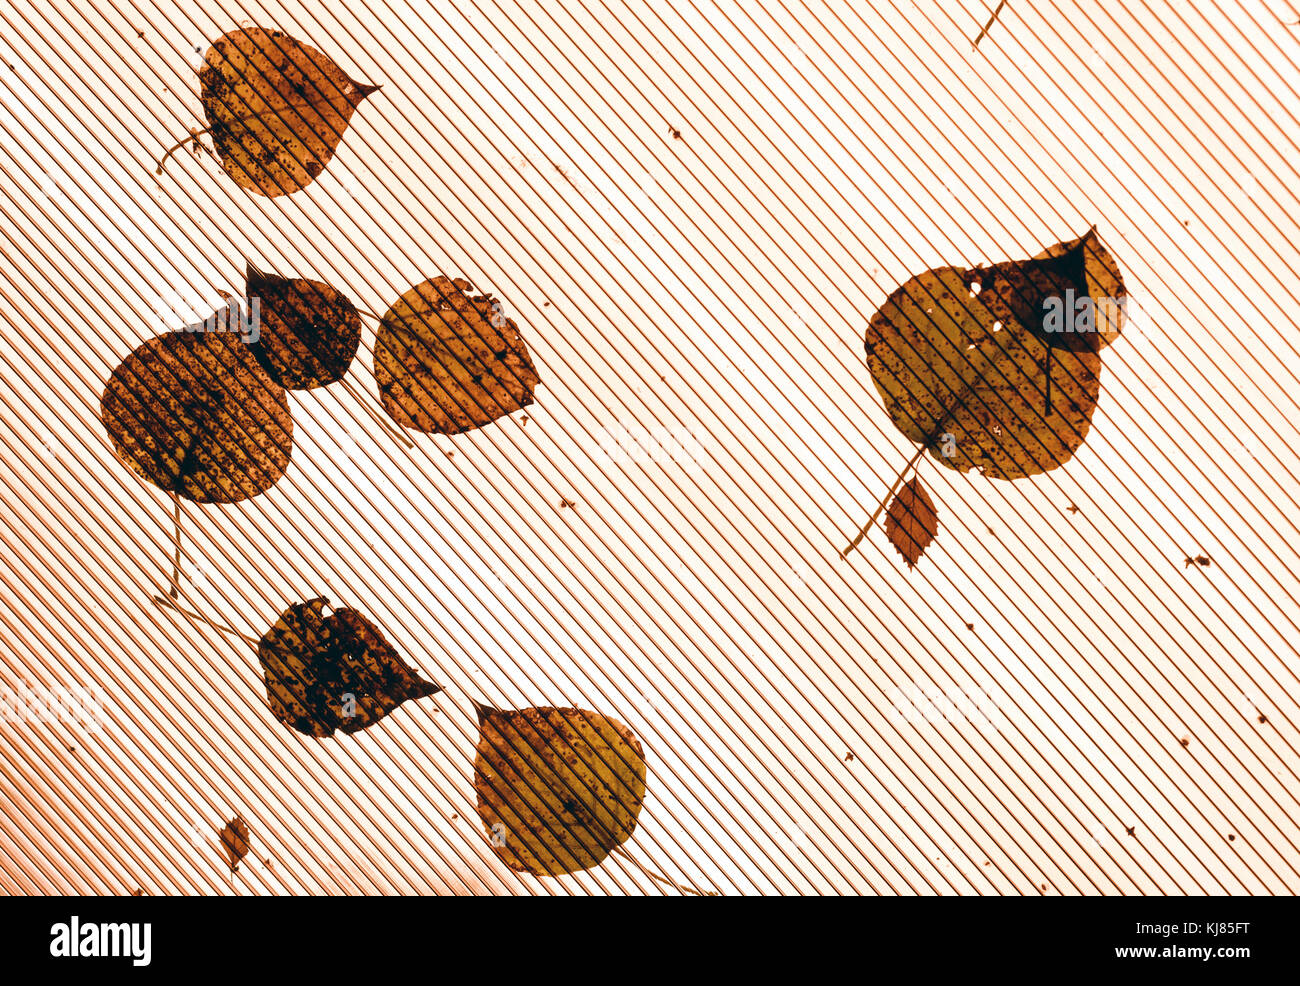 Fallen leaves on orange plastic roof with individual leaf patterns and copy space area for autumn fall based designs and backgrounds Stock Photo